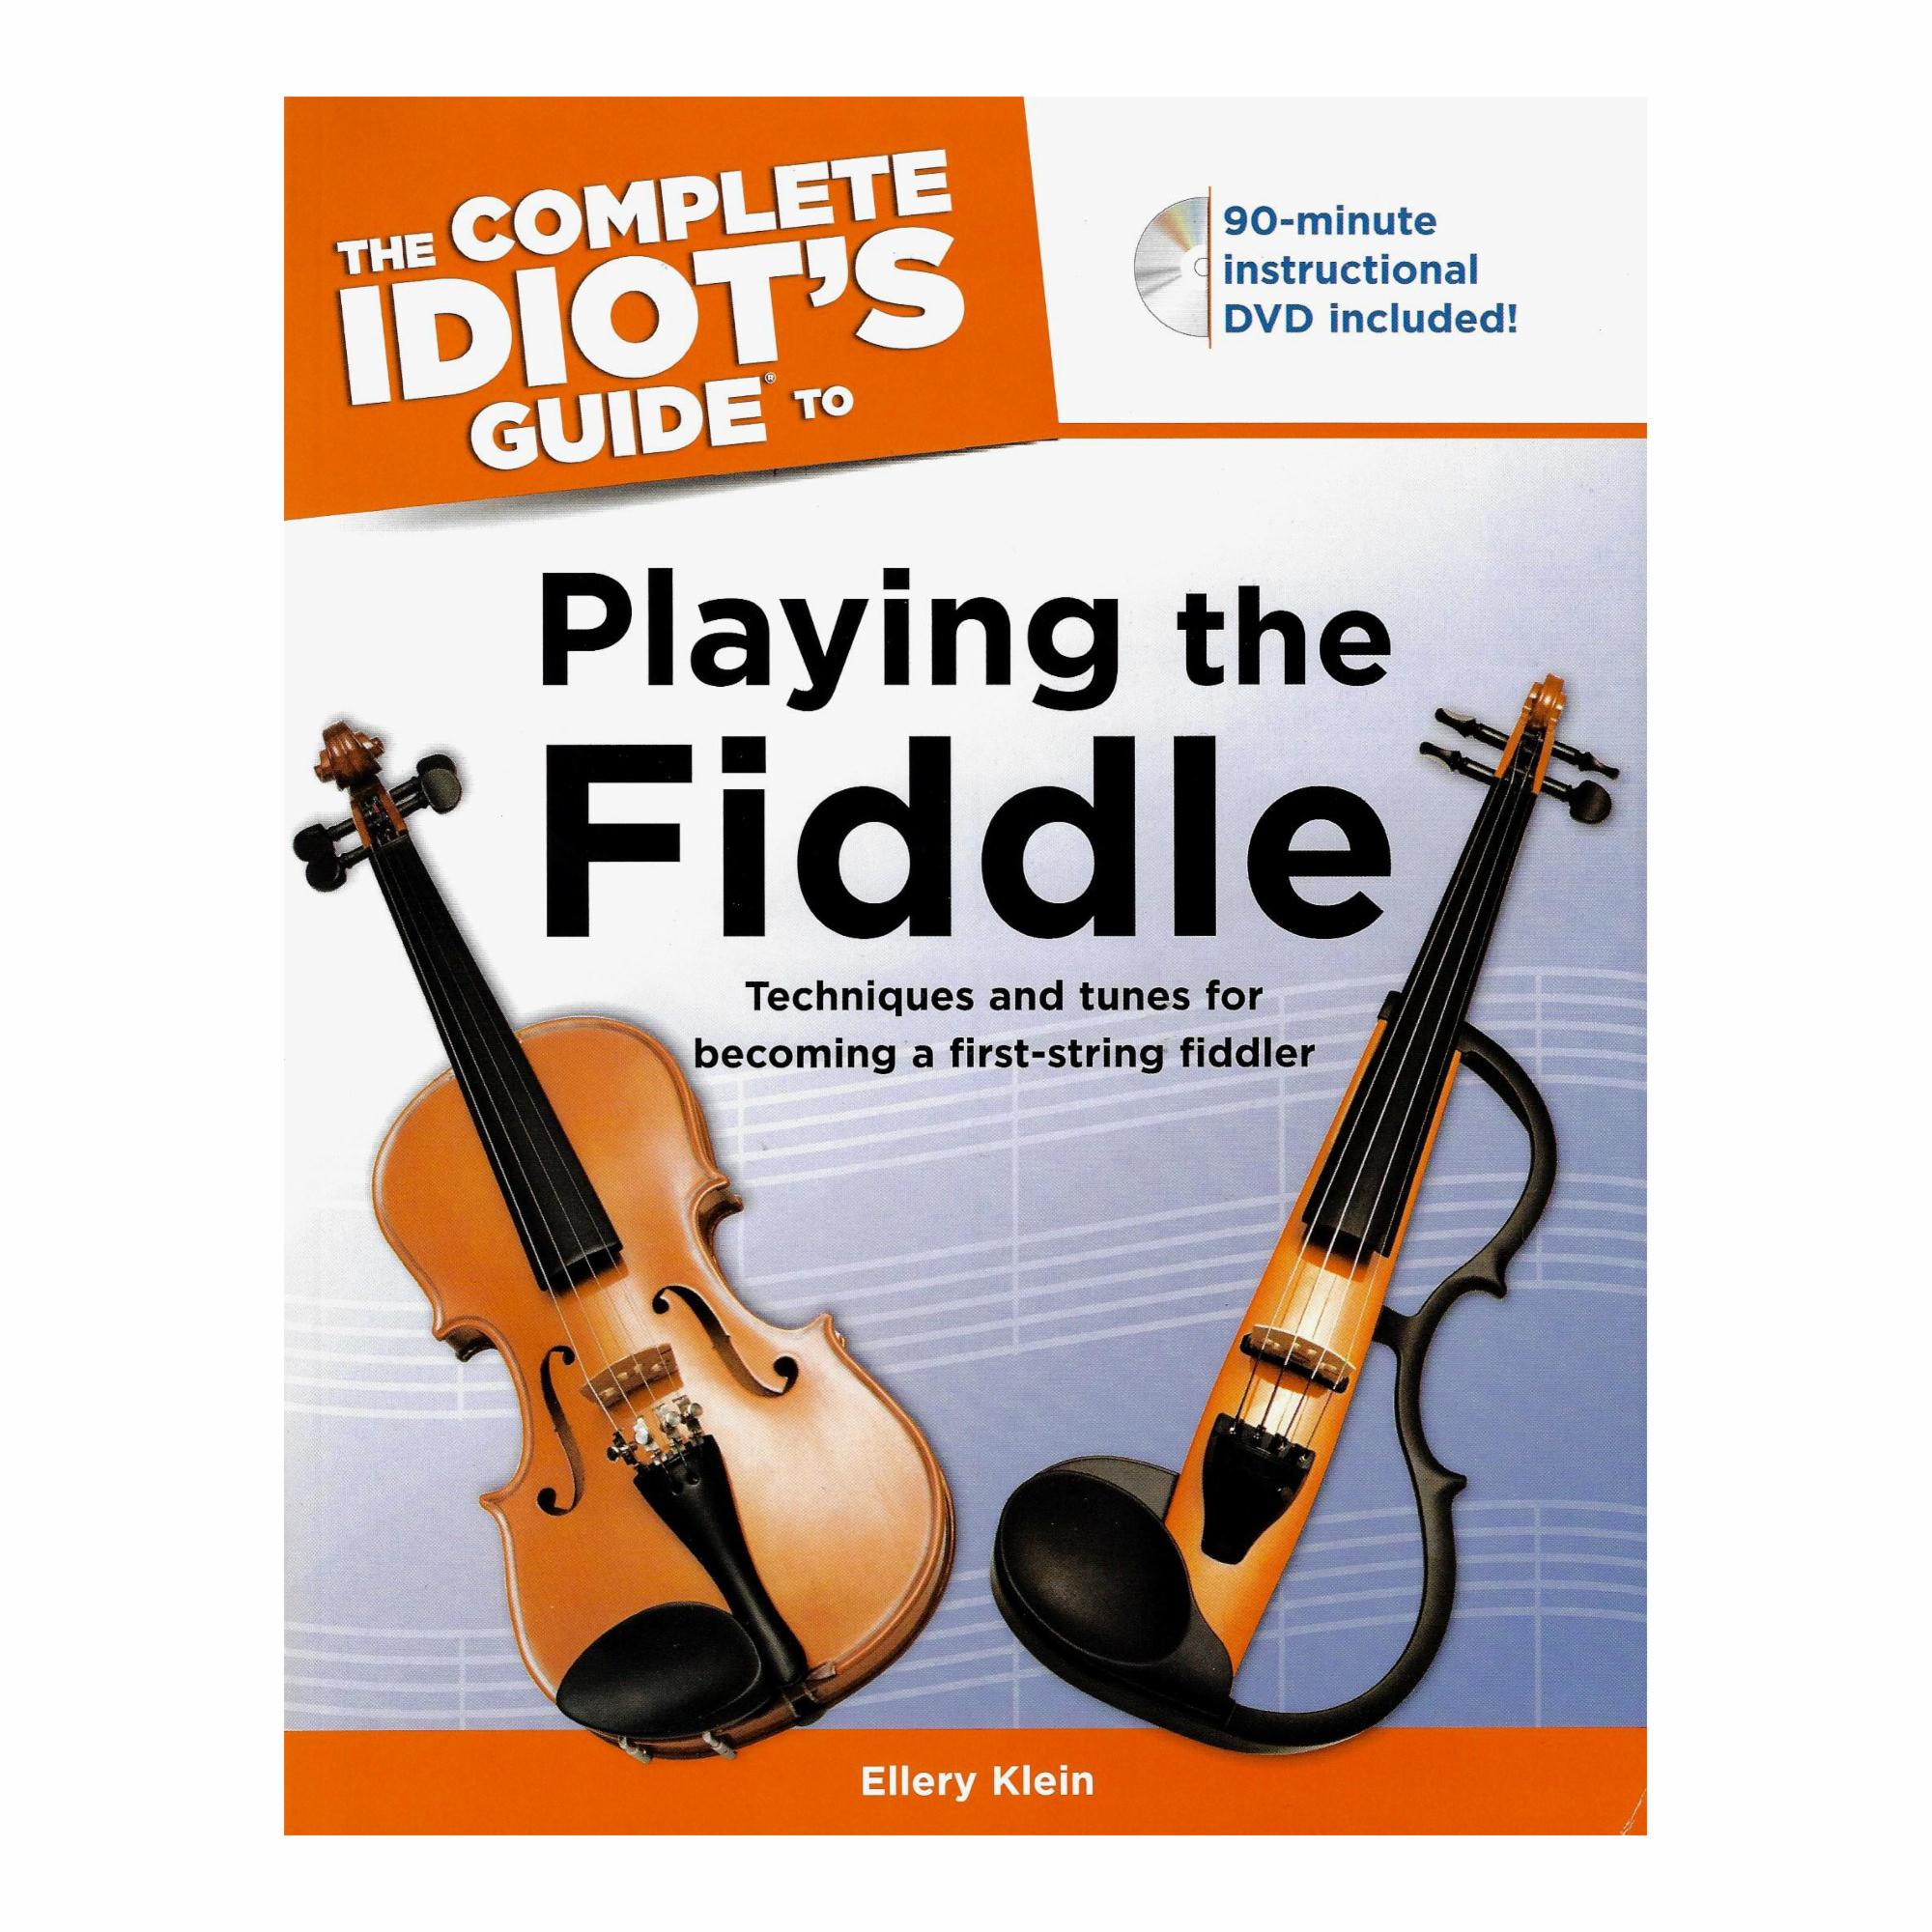 The Complete Idiot's Guide to Playing the Fiddle